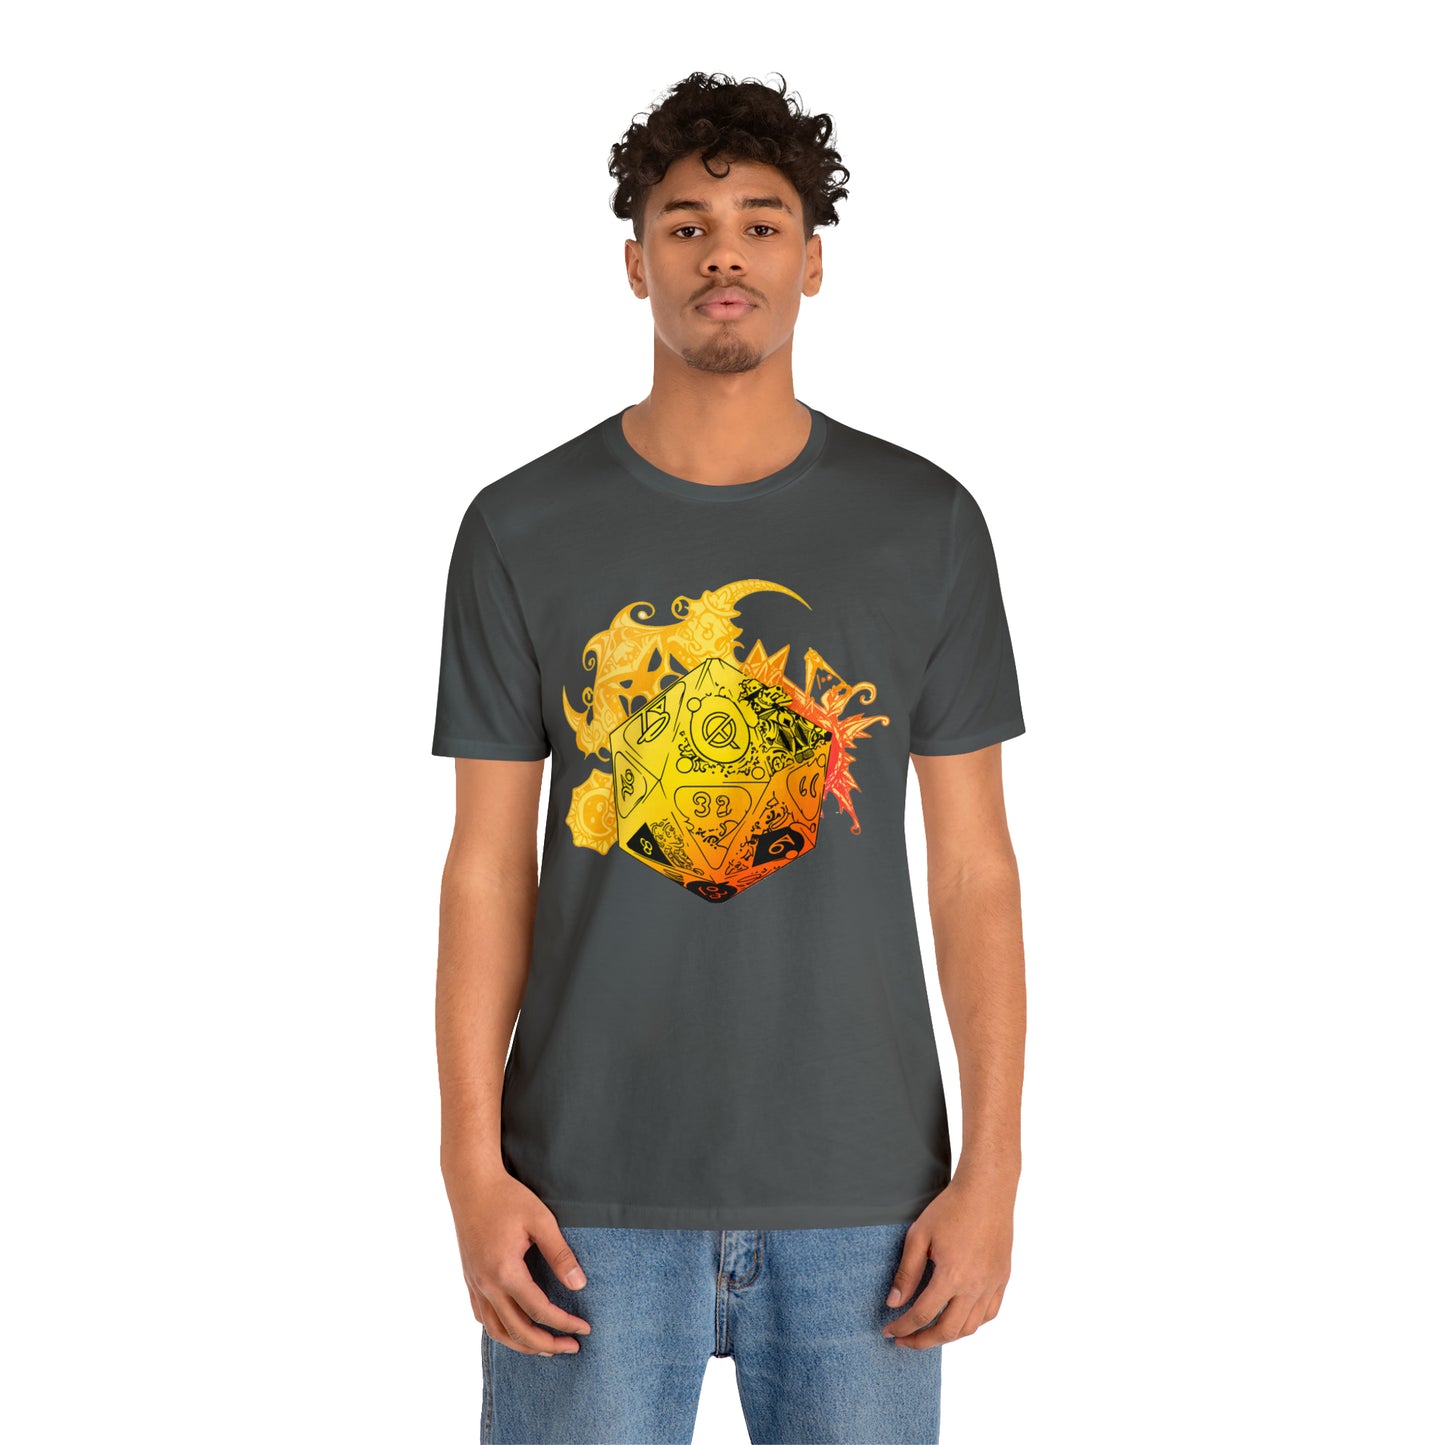 asphalt-quest-thread-tee-shirt-with-large-yellow-dragon-dice-on-center-of-shirt